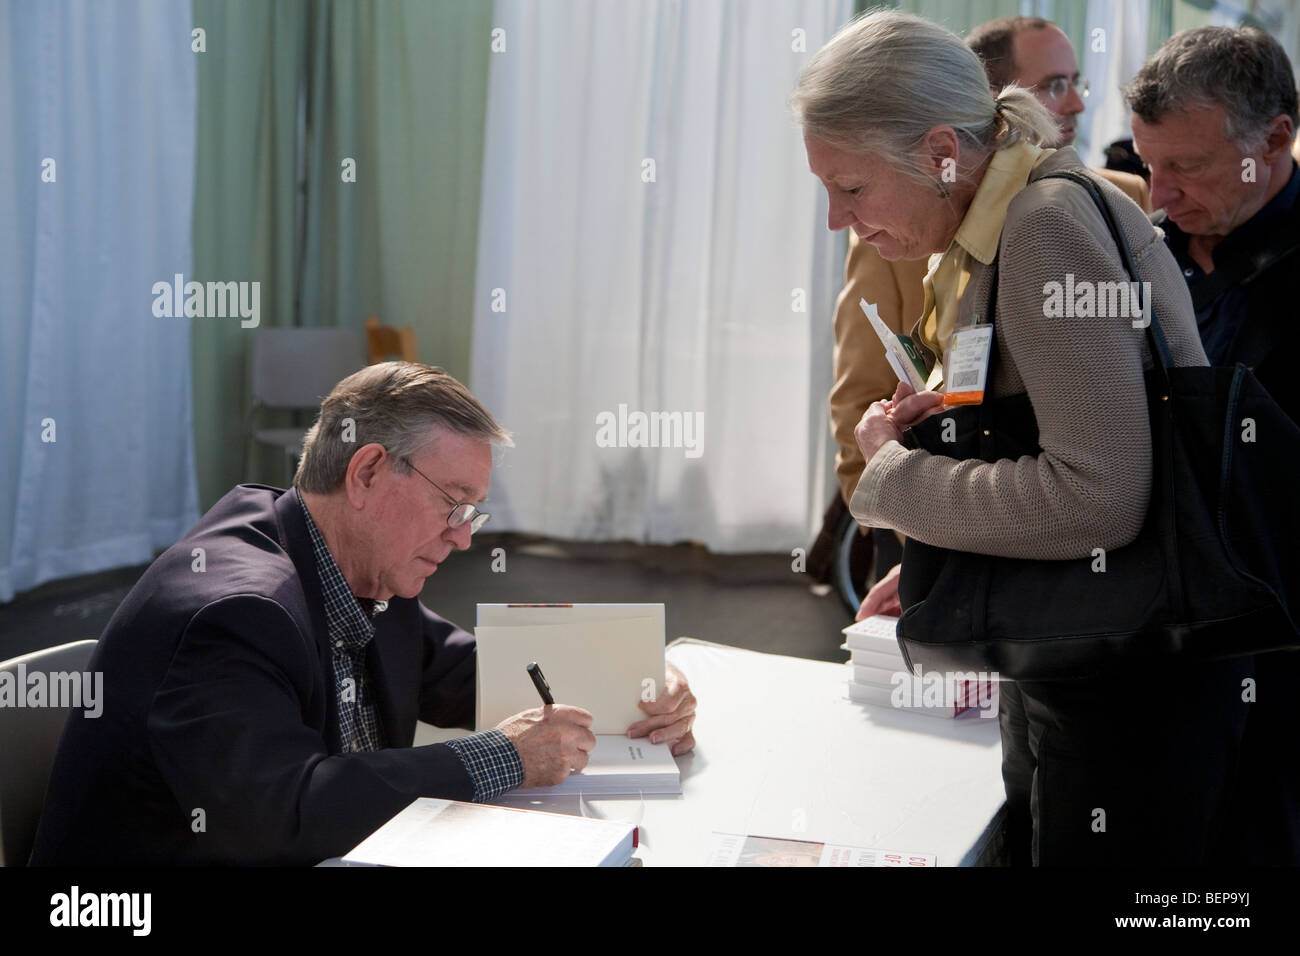 Ray Anderson, Chairman & Founder of Interface, Inc. and author of Confessions of a Radical Industrialist signing books. Stock Photo